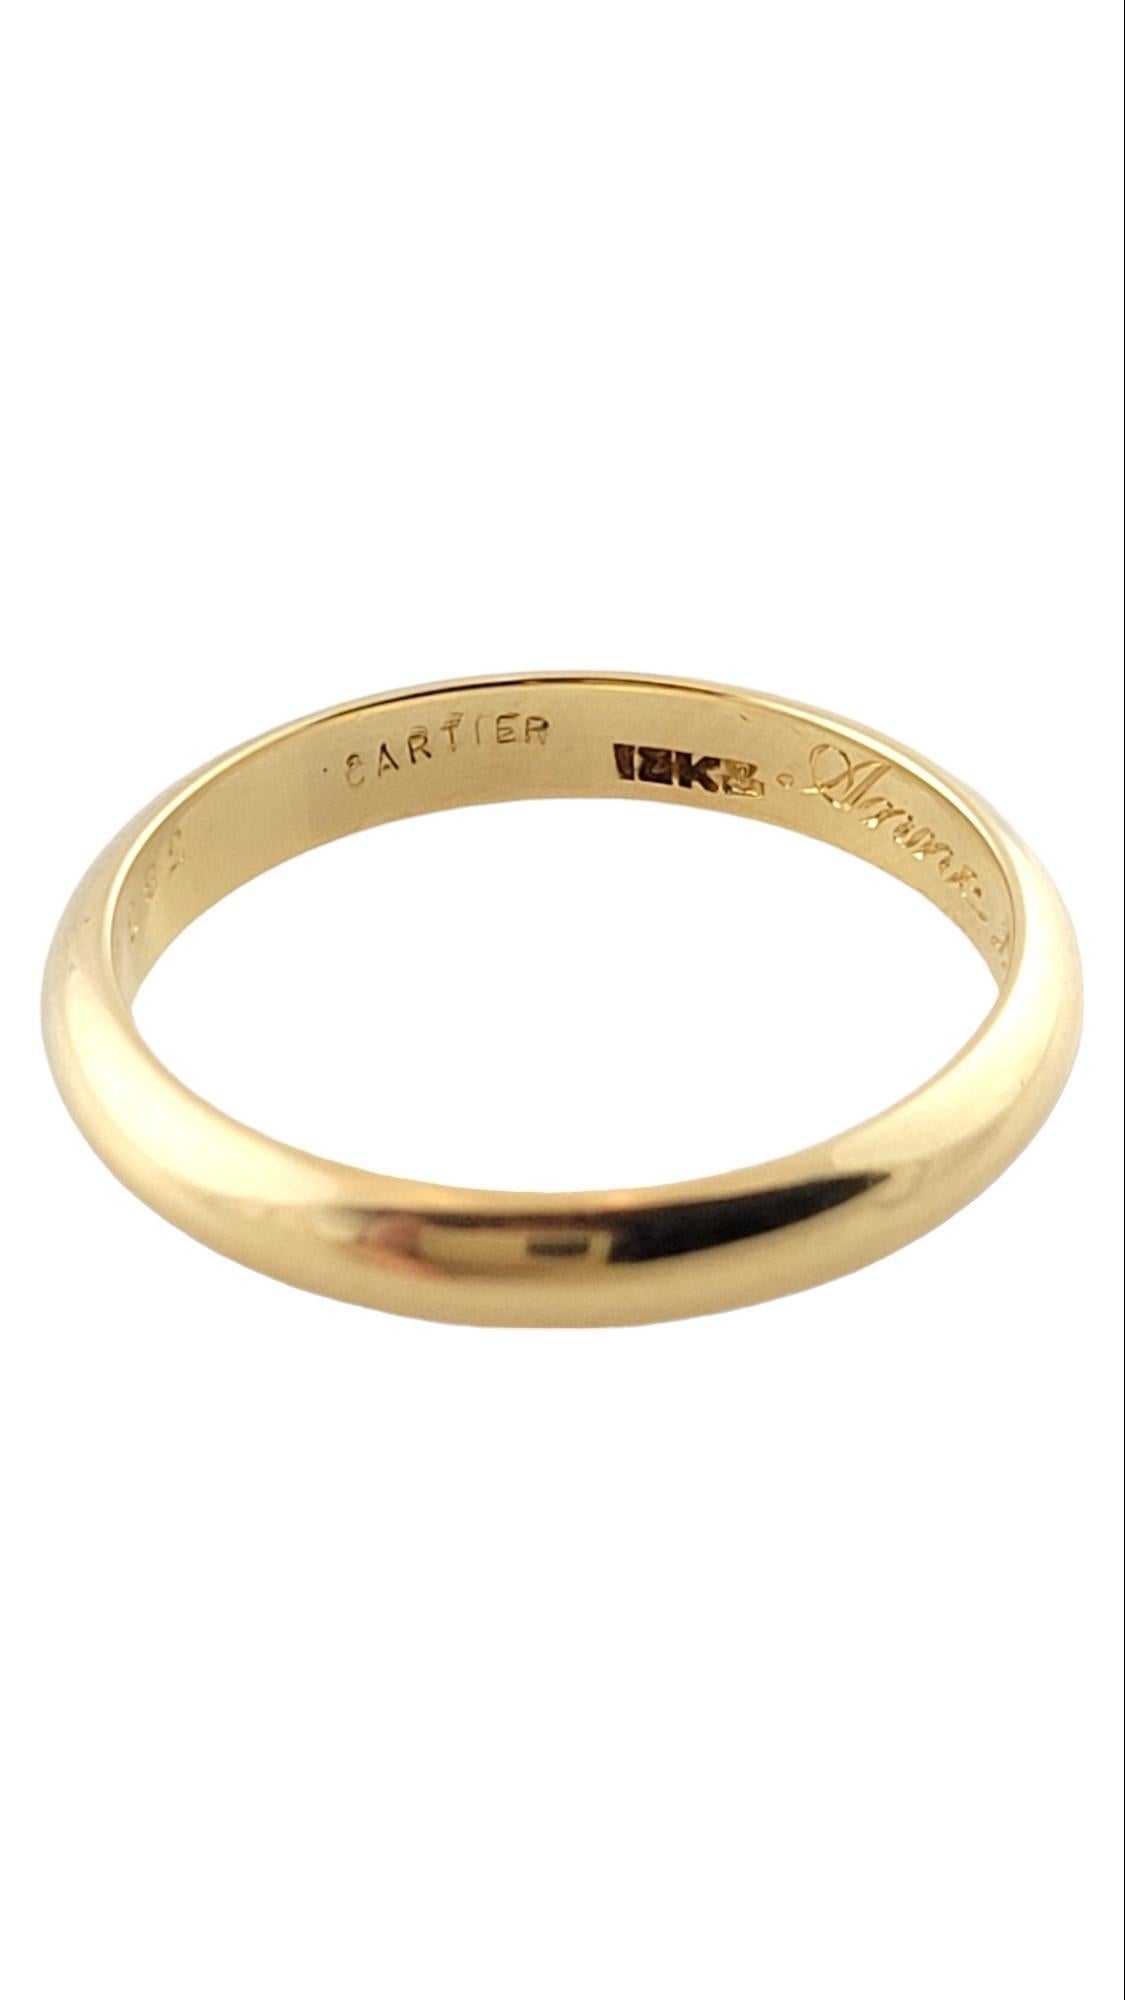  18K Yellow Gold Cartier Wedding Band Size 10.25 #15825 1